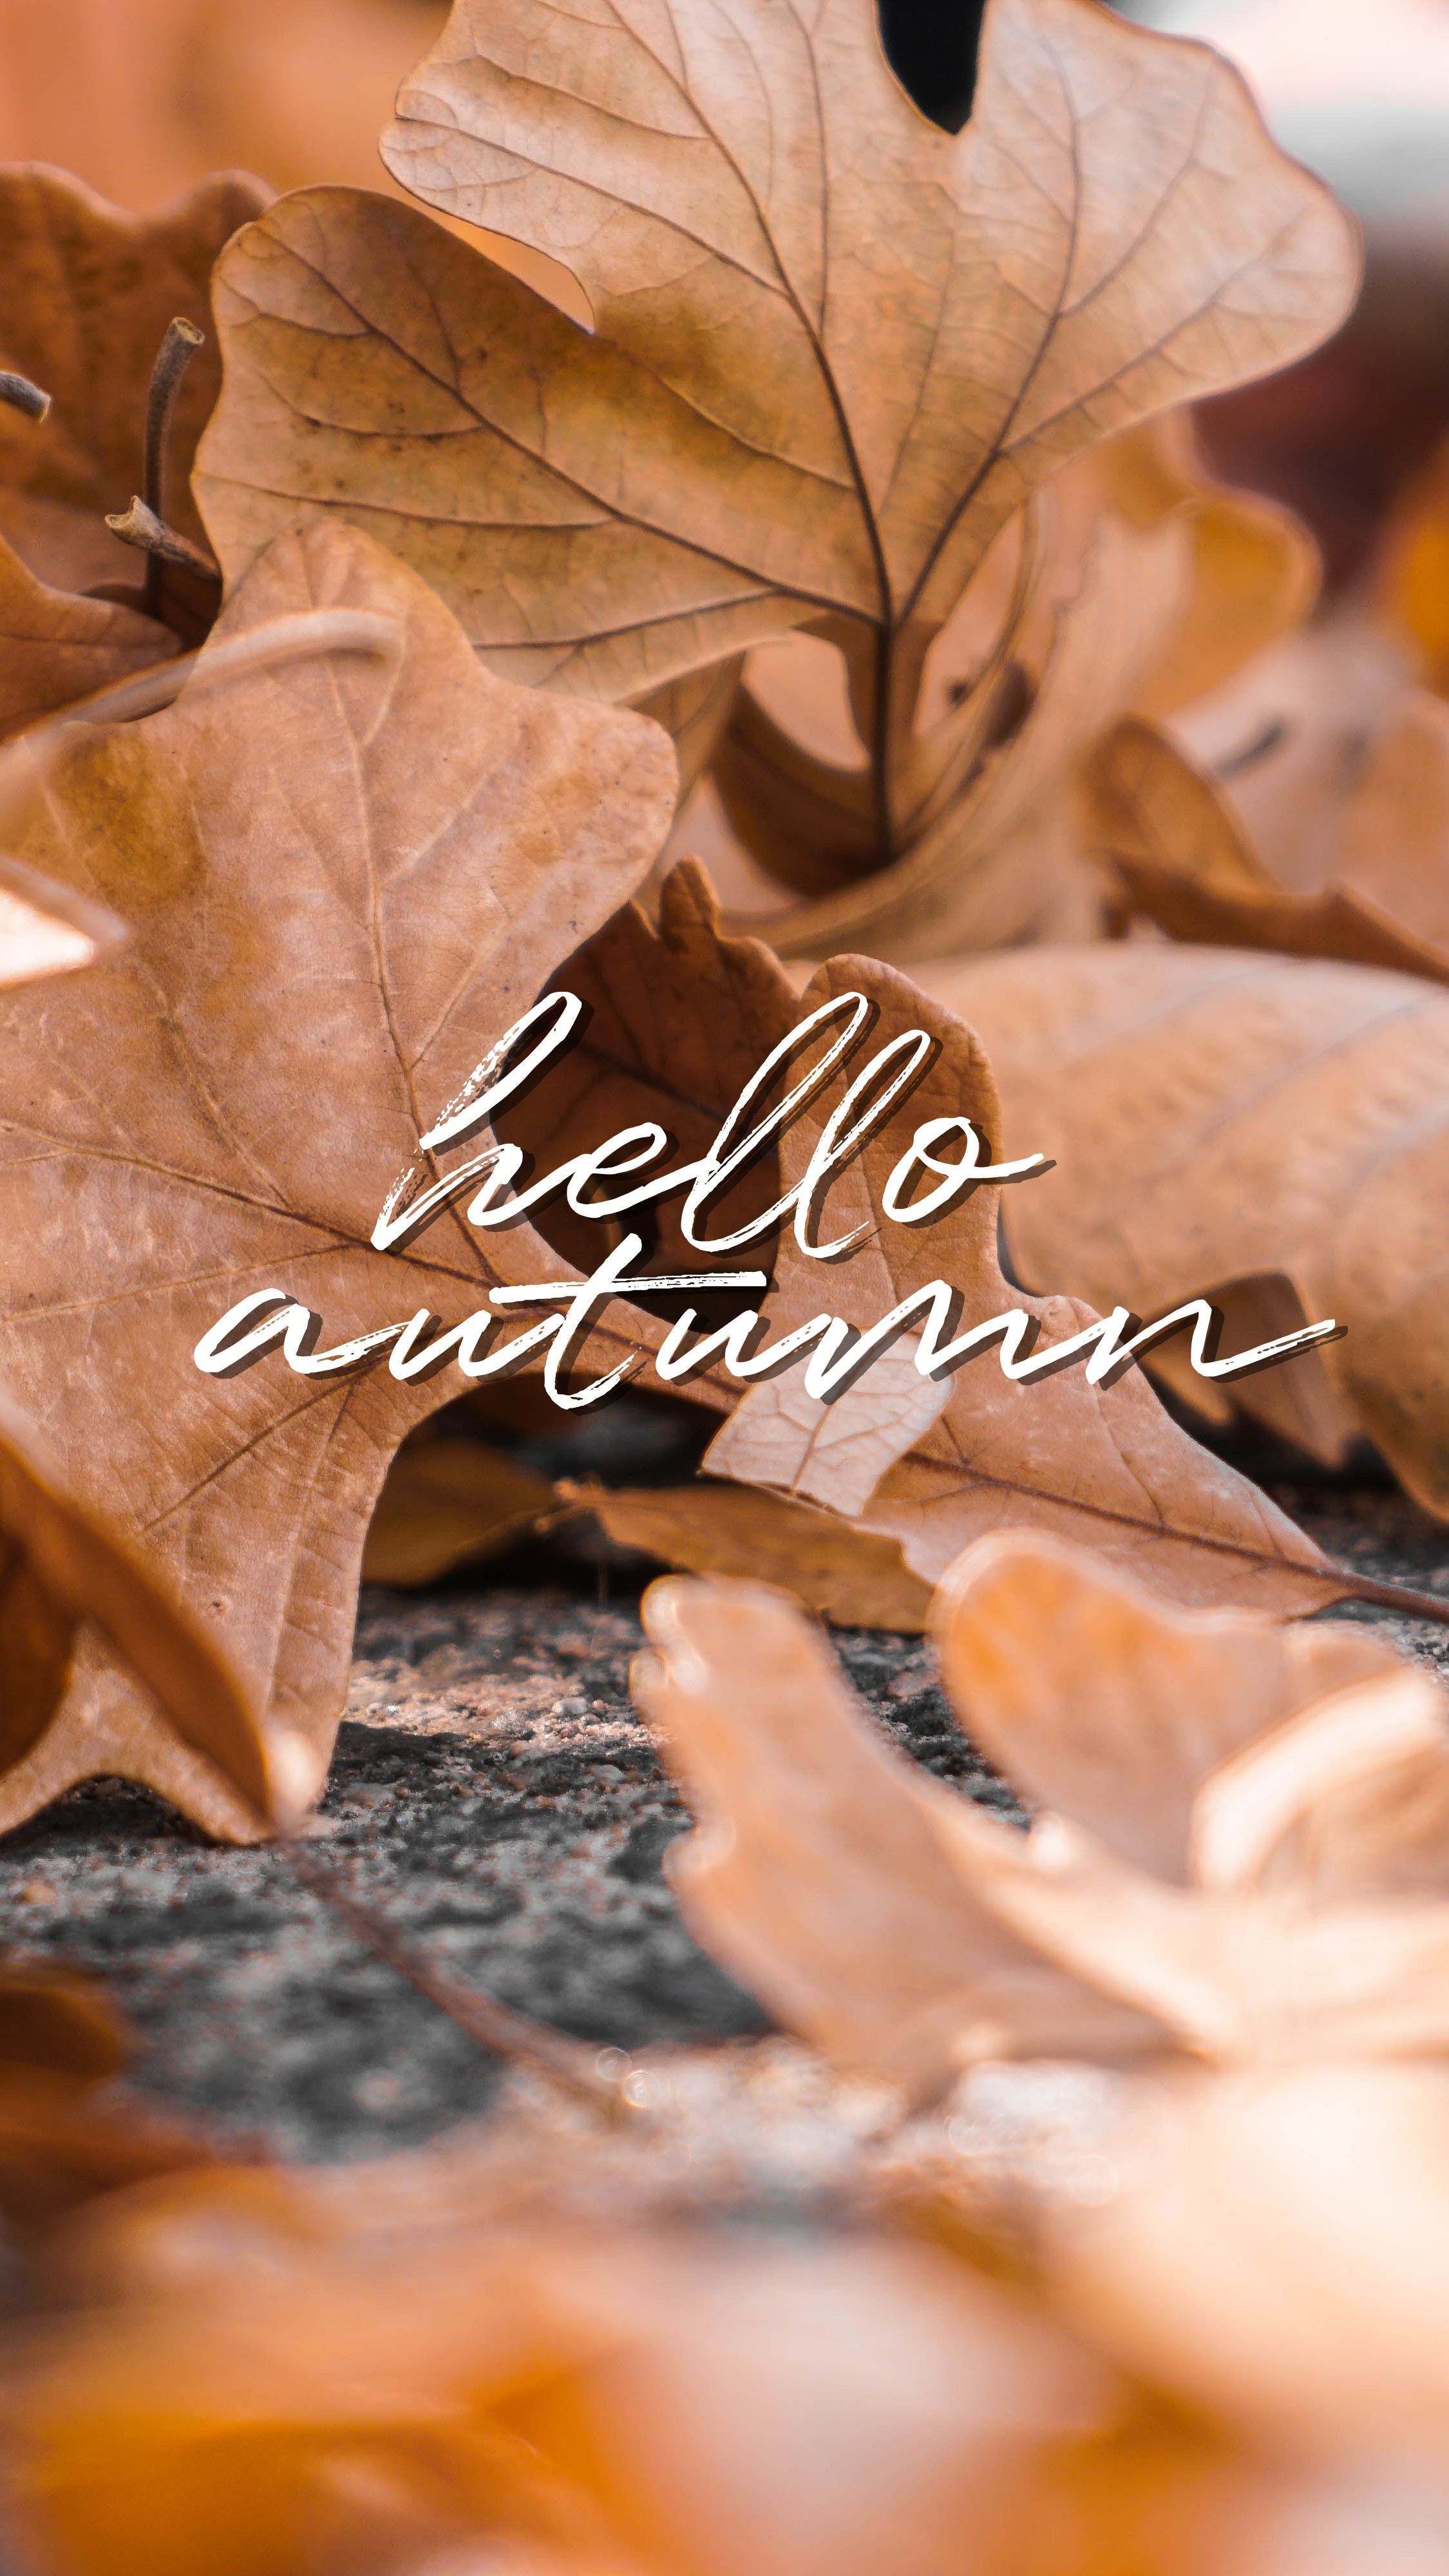 Welcome Autumn Wallpapers